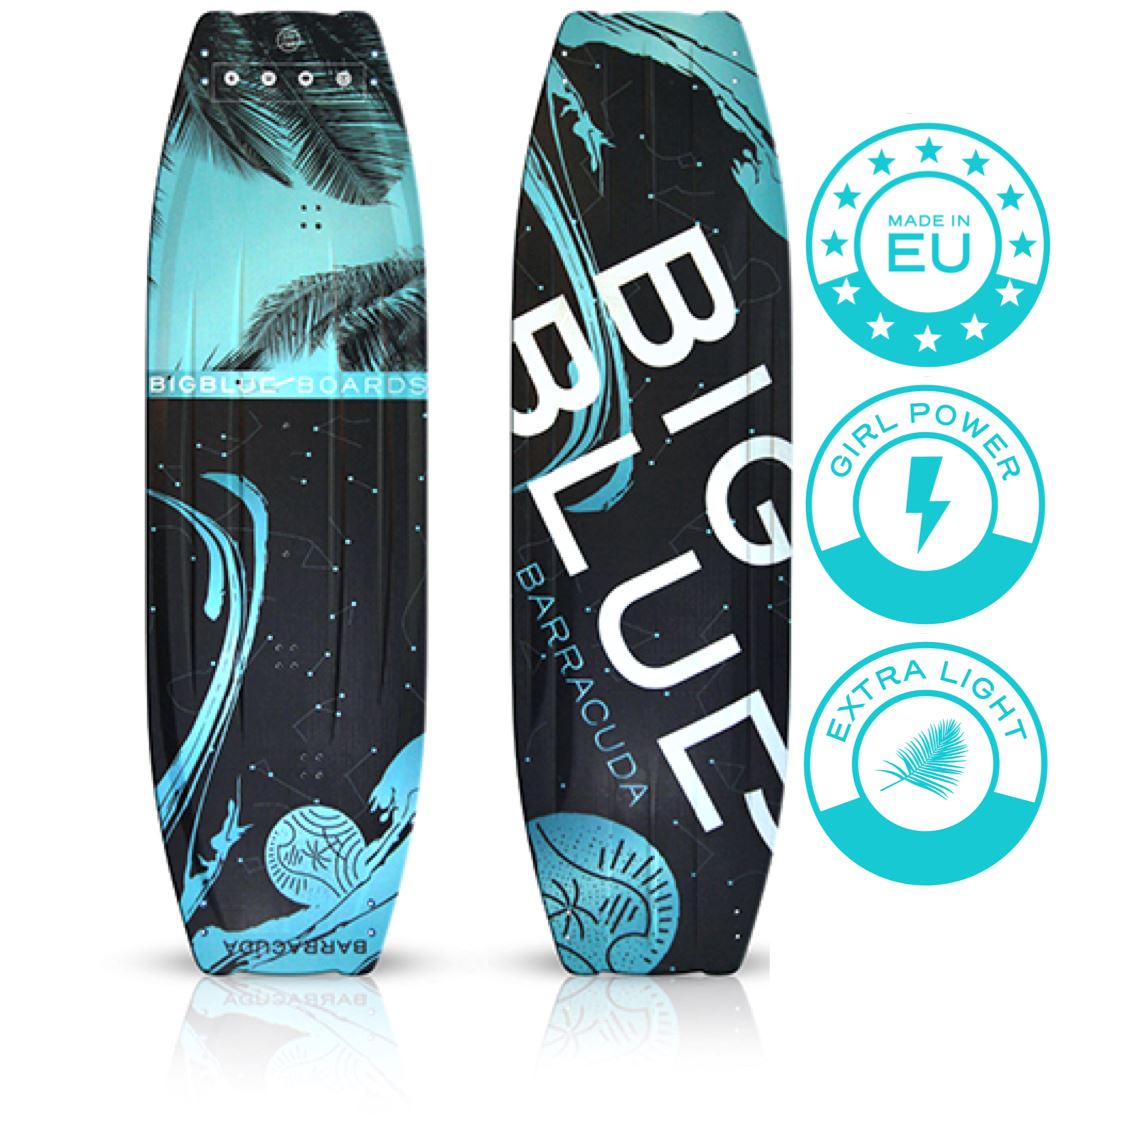 BIG BLUE BOARDS BARRACUDA | Kiteboard | Carbon Twintip | Advanced Freeride and Freestyle | 2 Colors Twintip kiteboard BIG BLUE Boards 